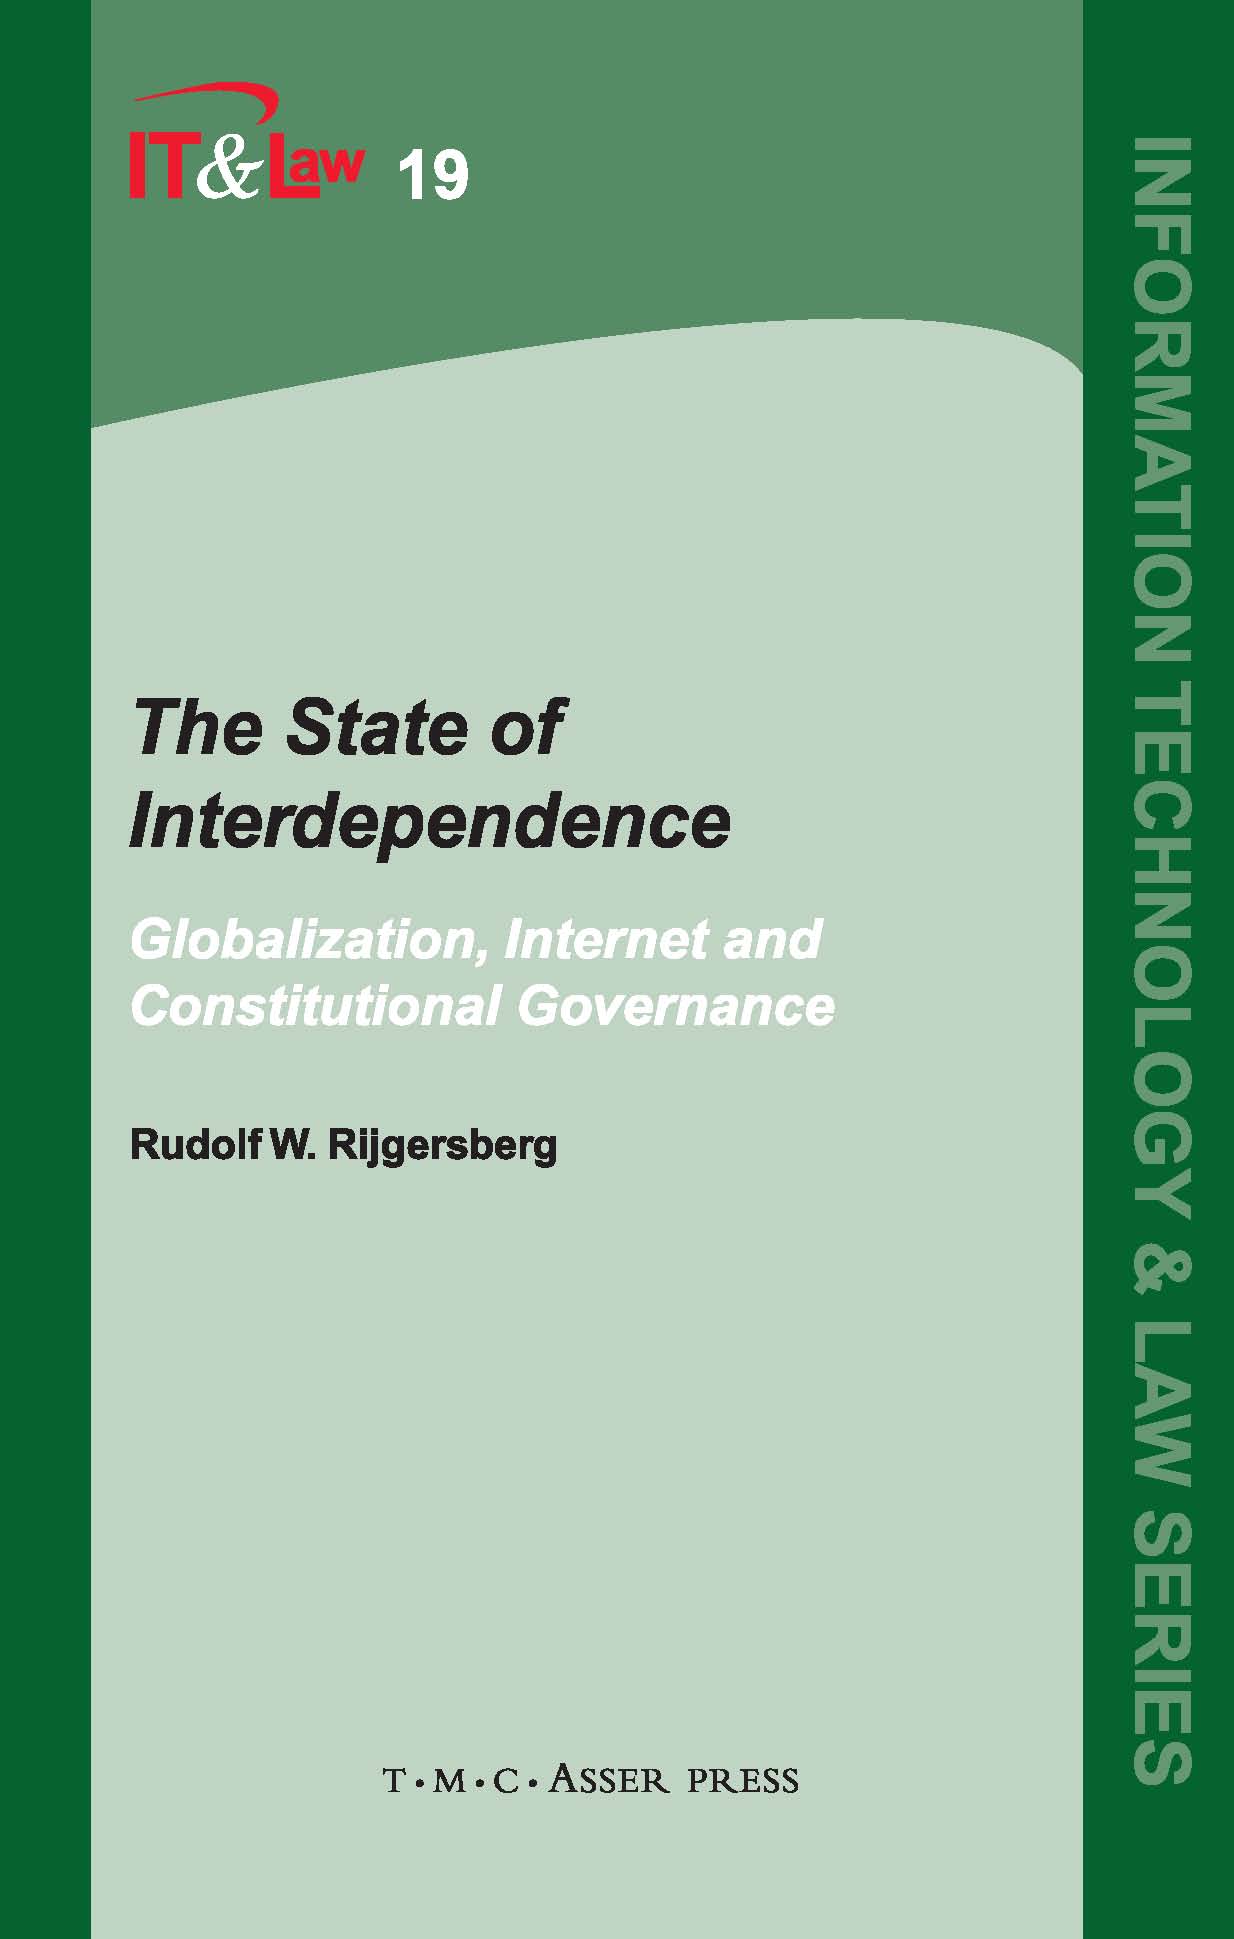 The State of Interdependence - Globalization, Internet and Constitutional Governance